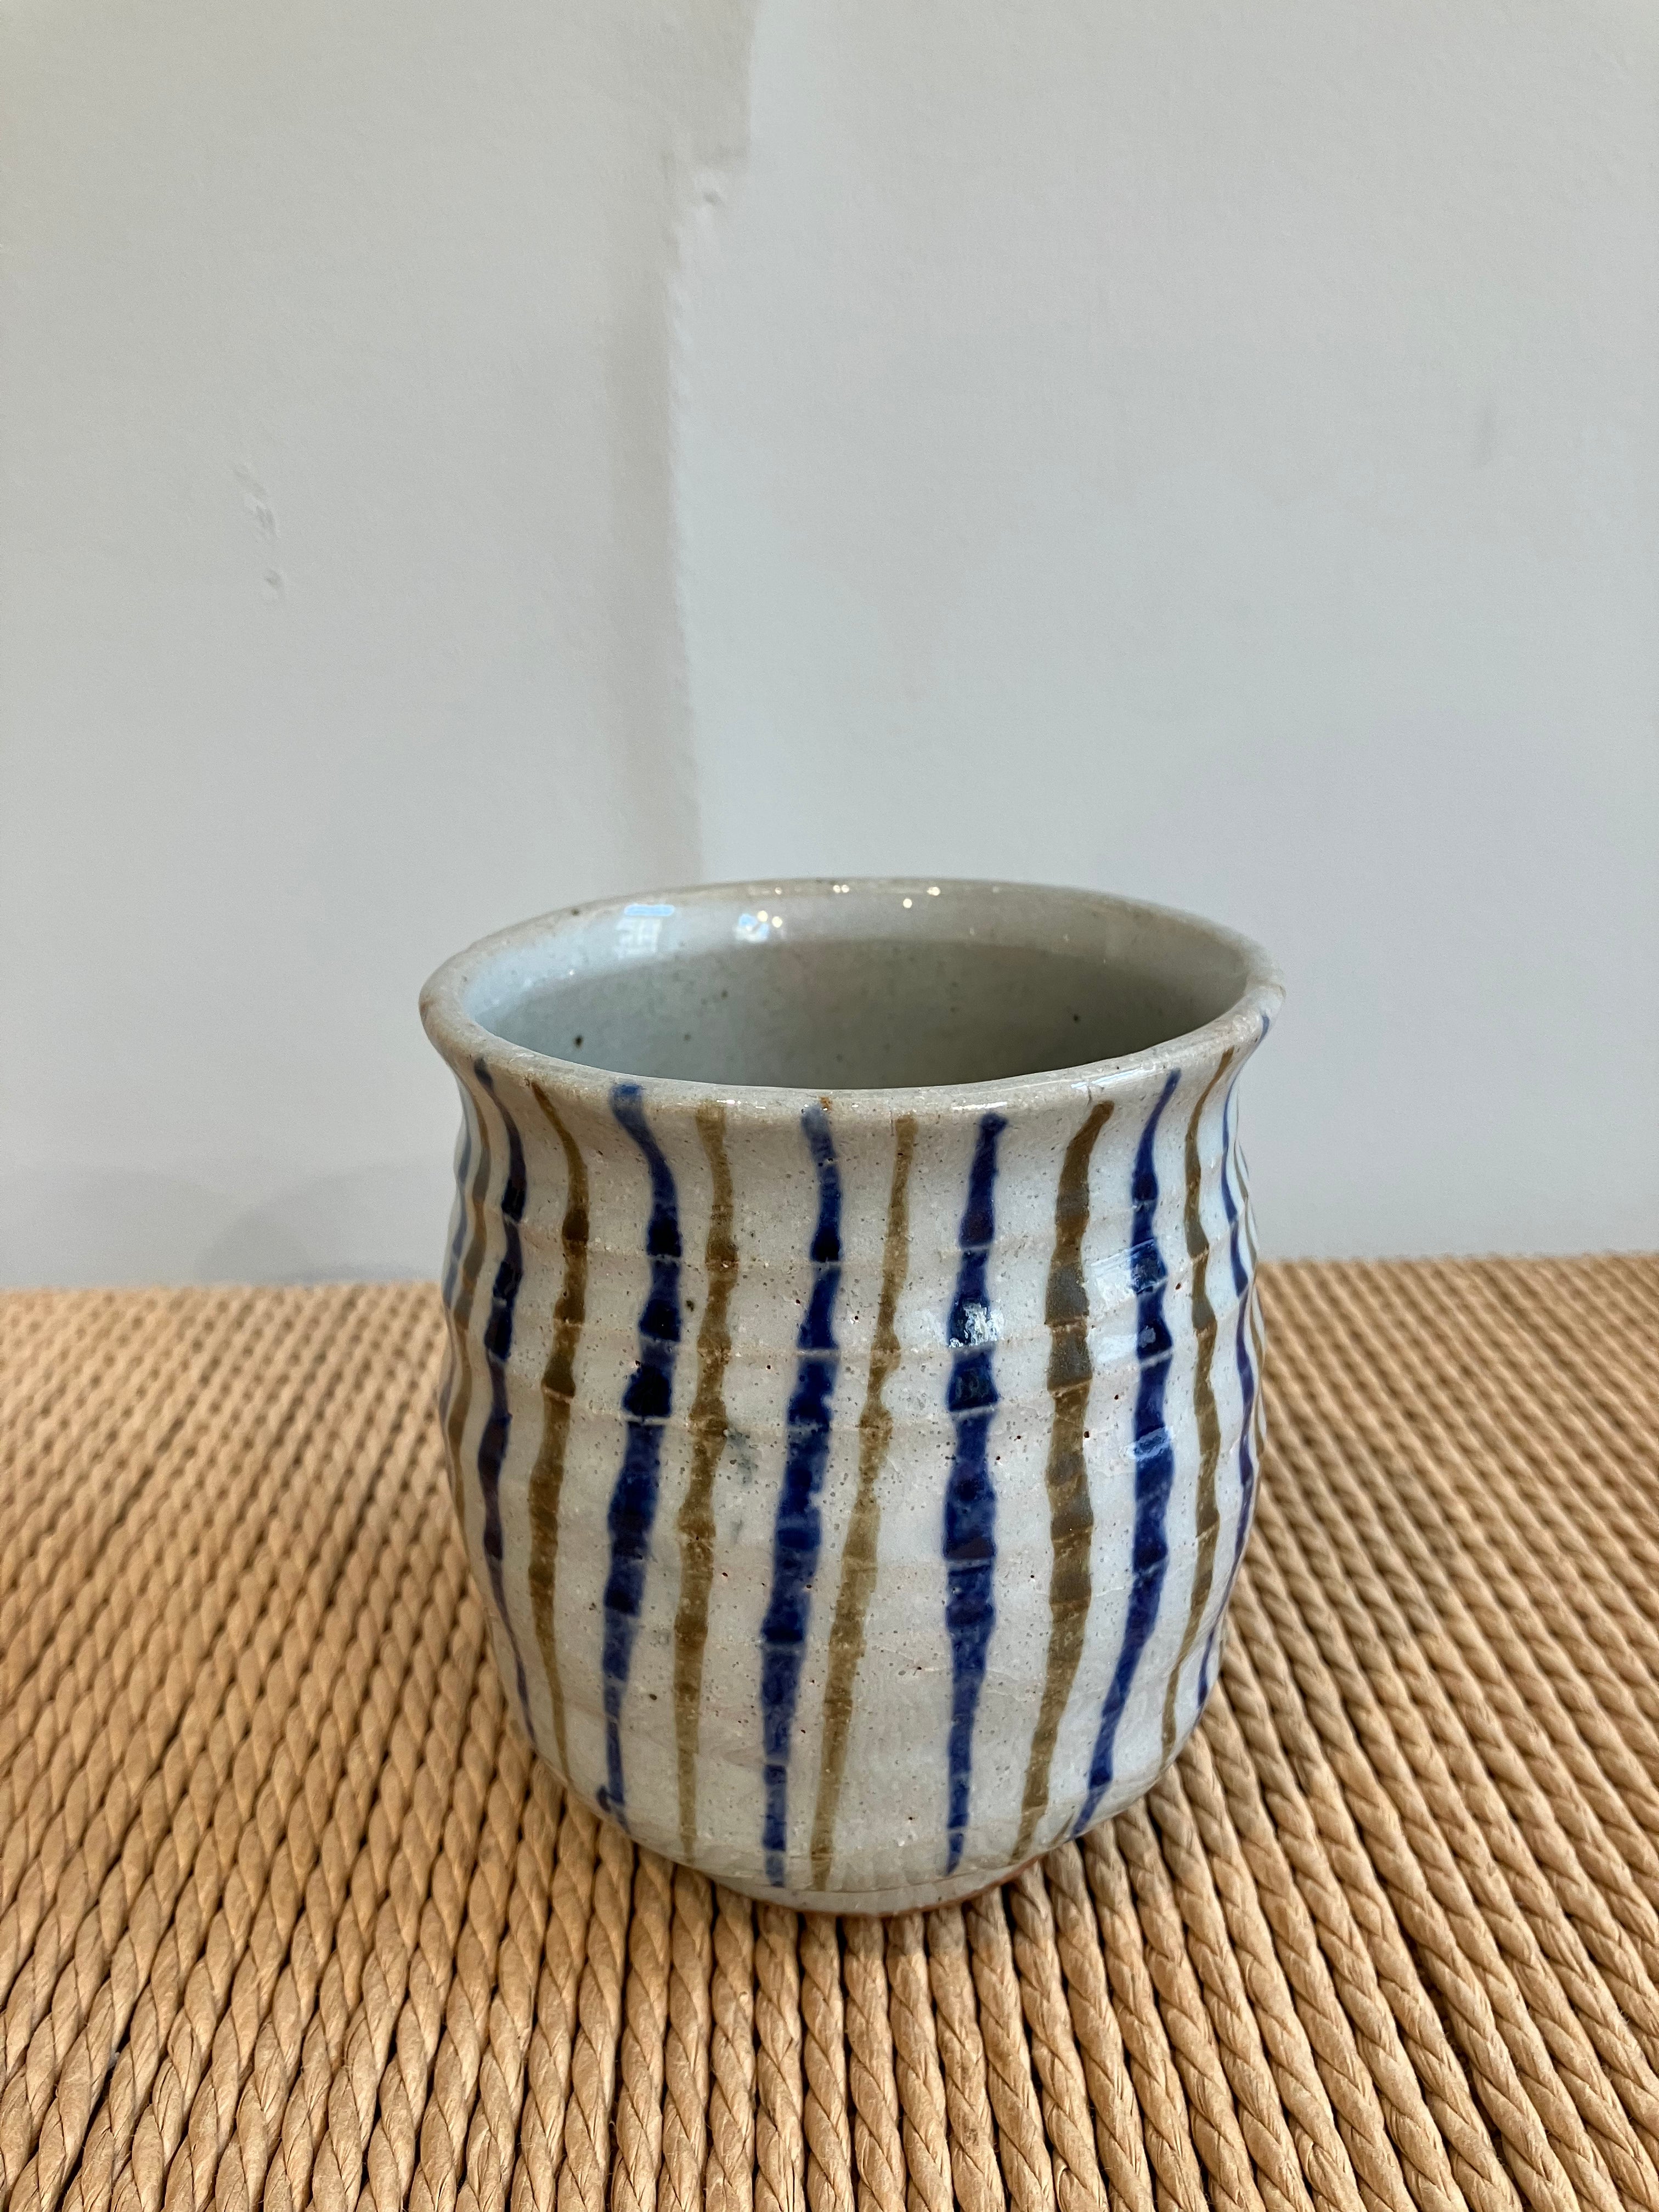 Large striped cup with blue and brown stripes